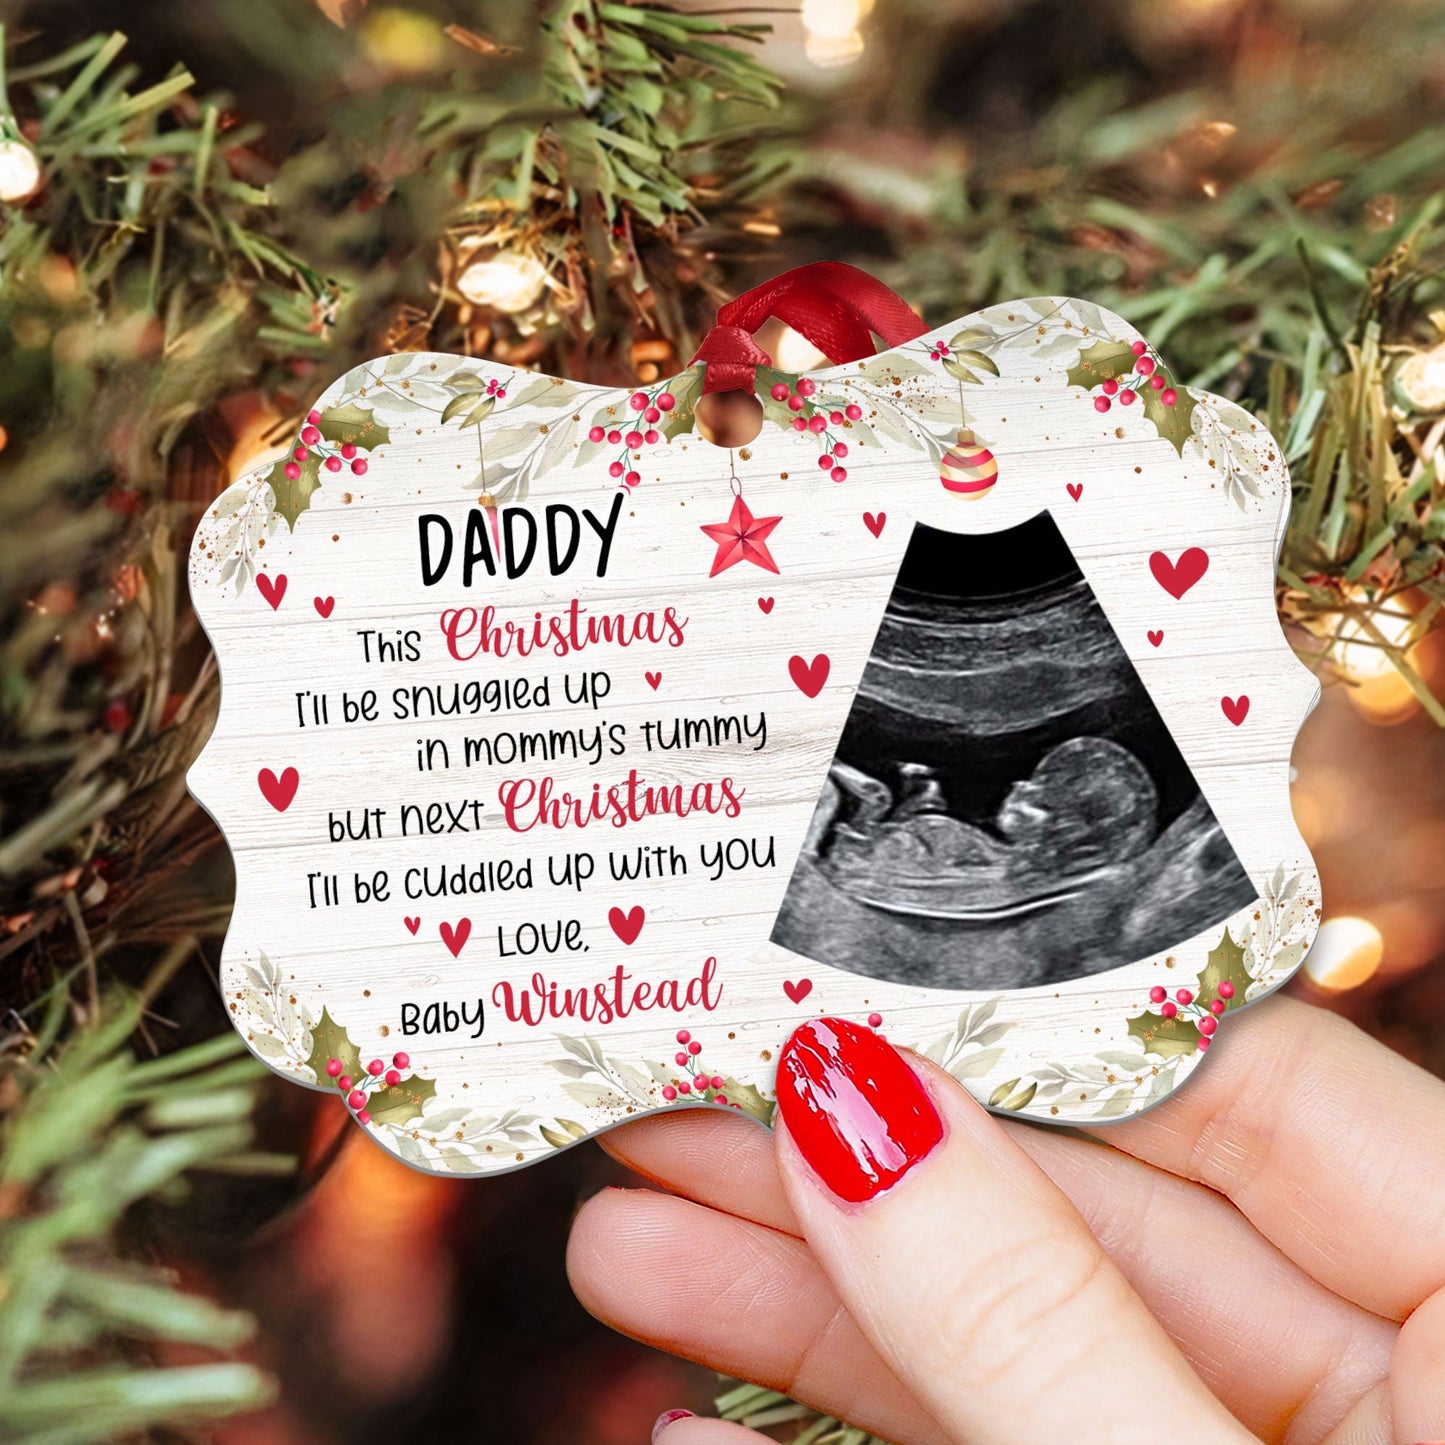 This Christmas, I'll Be Suggled Up In Mommy's Tummy - Personalized Aluminum Ornament - Christmas Gift For Daddy-To-Be, Father, Grandma, Grandpa, Family Members - From Baby, Bump